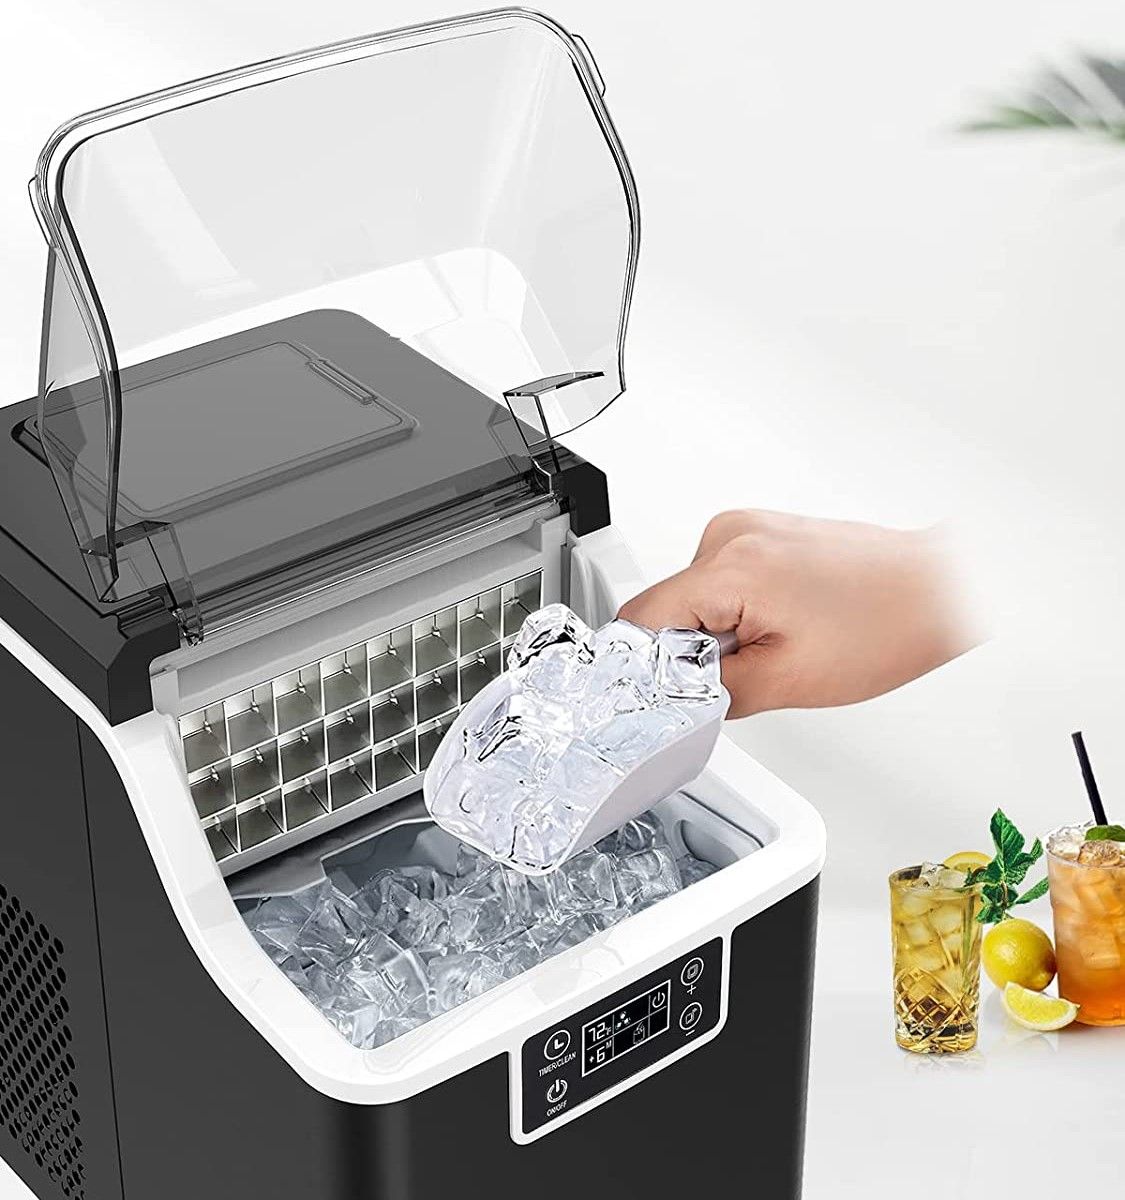 Enjoy Cold Drinks All Summer Long with a Stainless Steel Outdoor Ice Maker